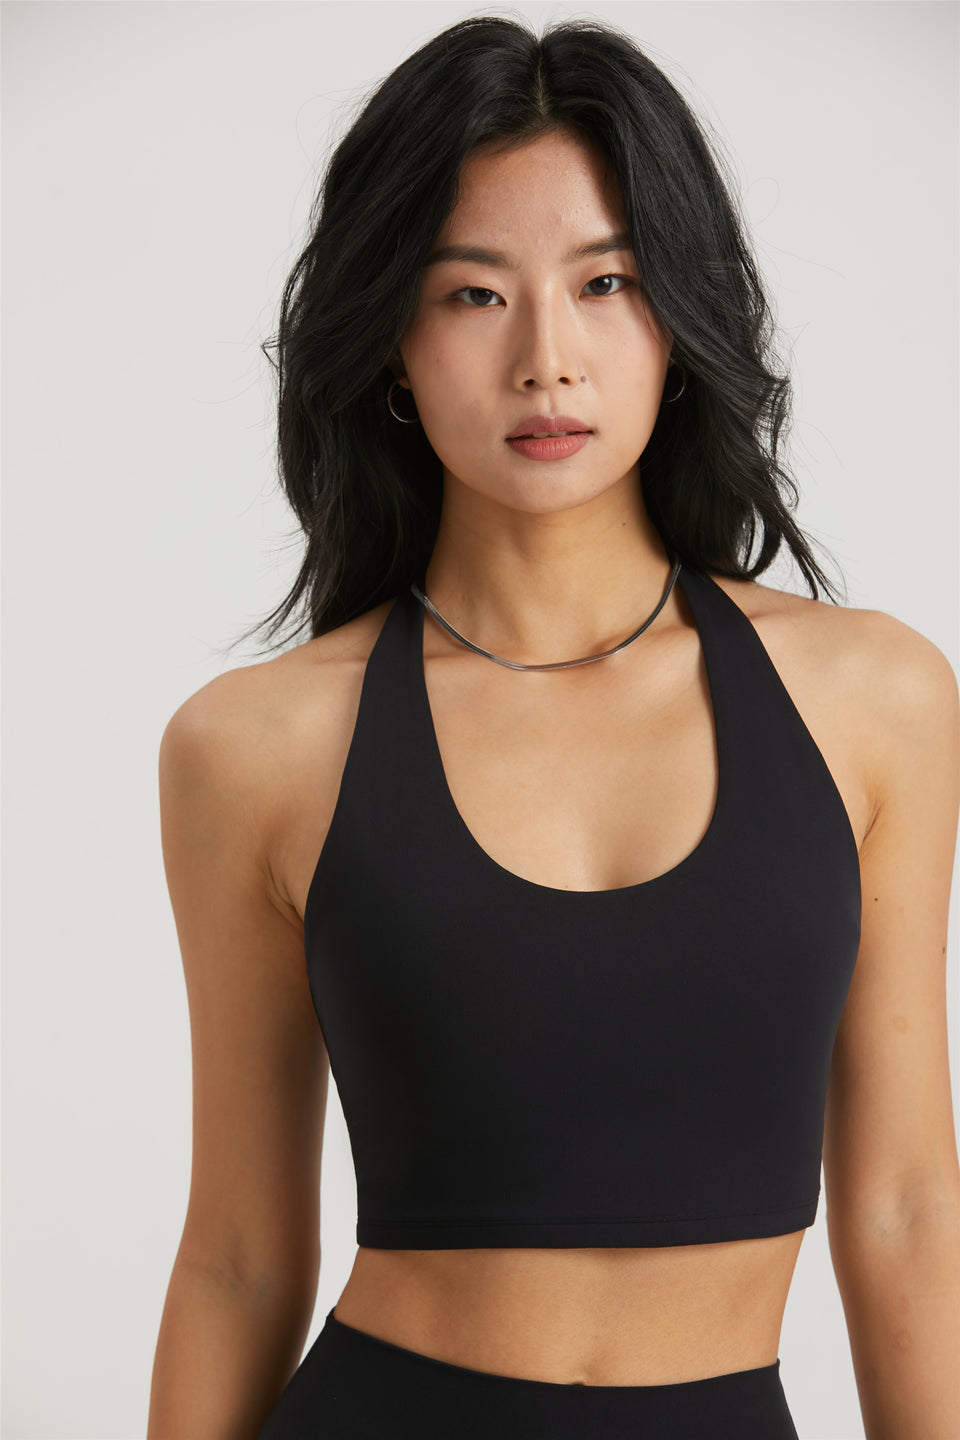 CROPPED HALTER TOP